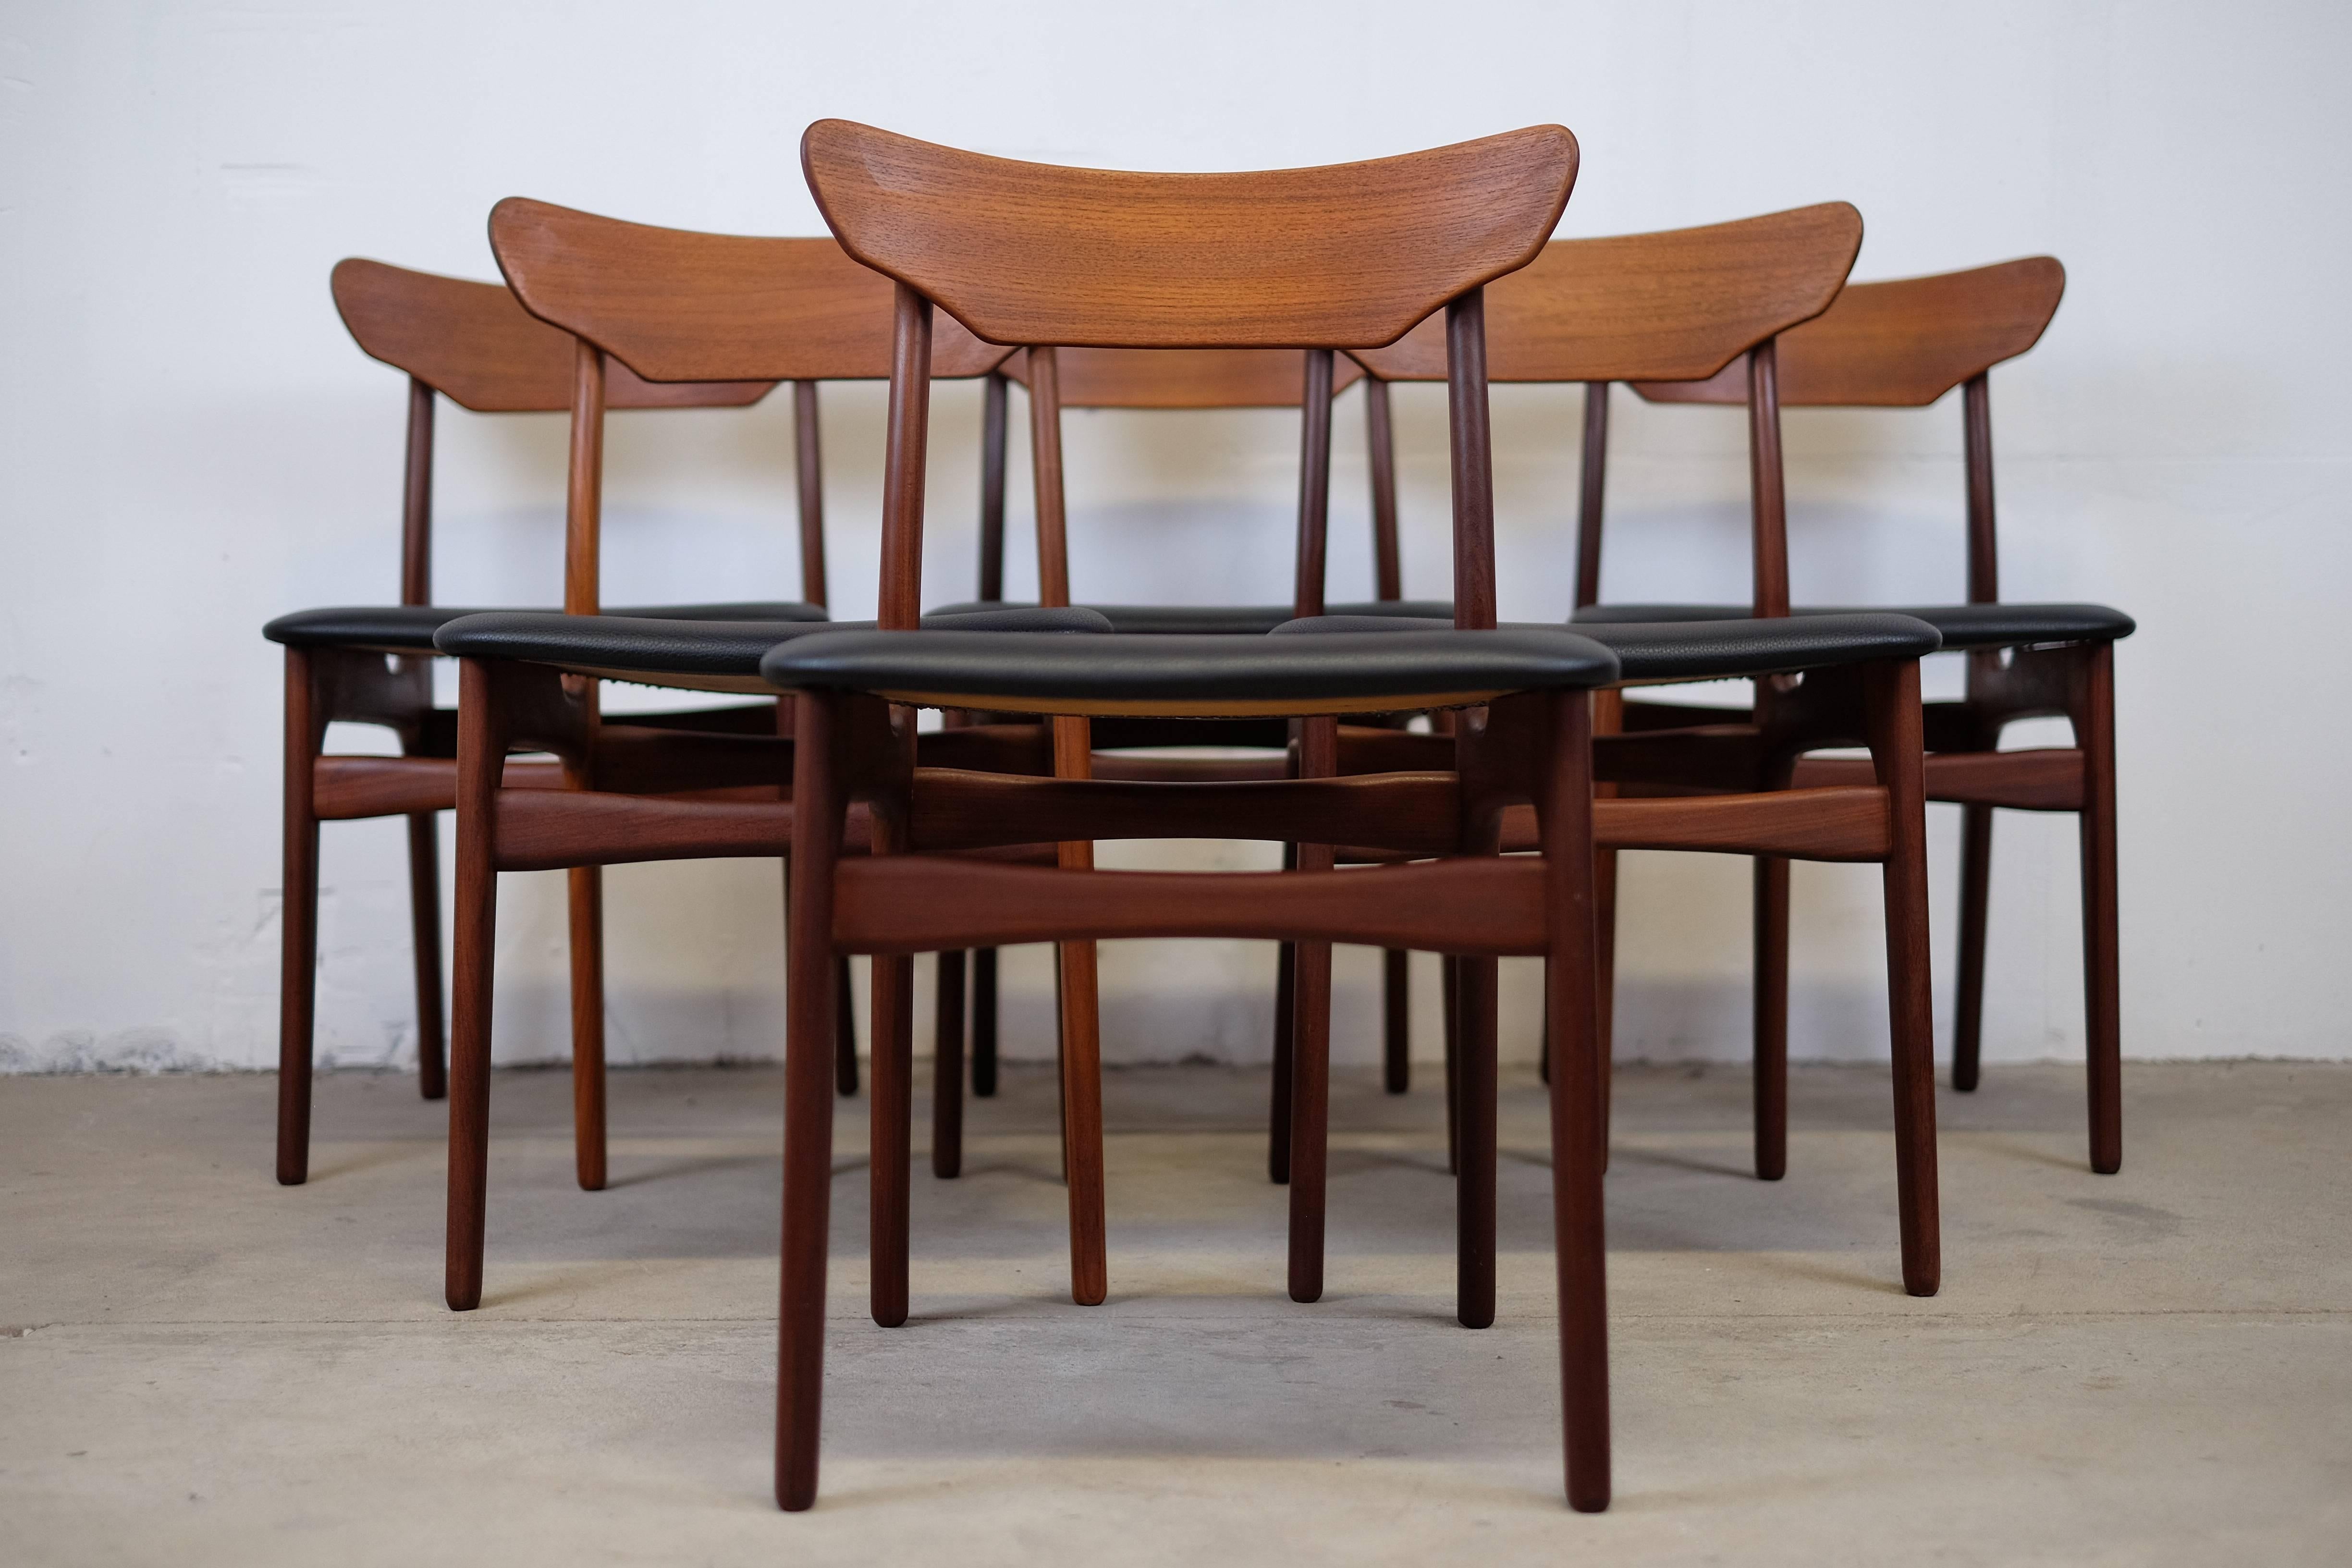 Set of six beautiful, stylish and top quality dining chairs in teak from the 1960s by Schøning and Elgaard.

The frames and back are in excellent condition for their age and the same with the green seats.
(THE CHAIRS JUST GOT REUPHOLSTERED WITH